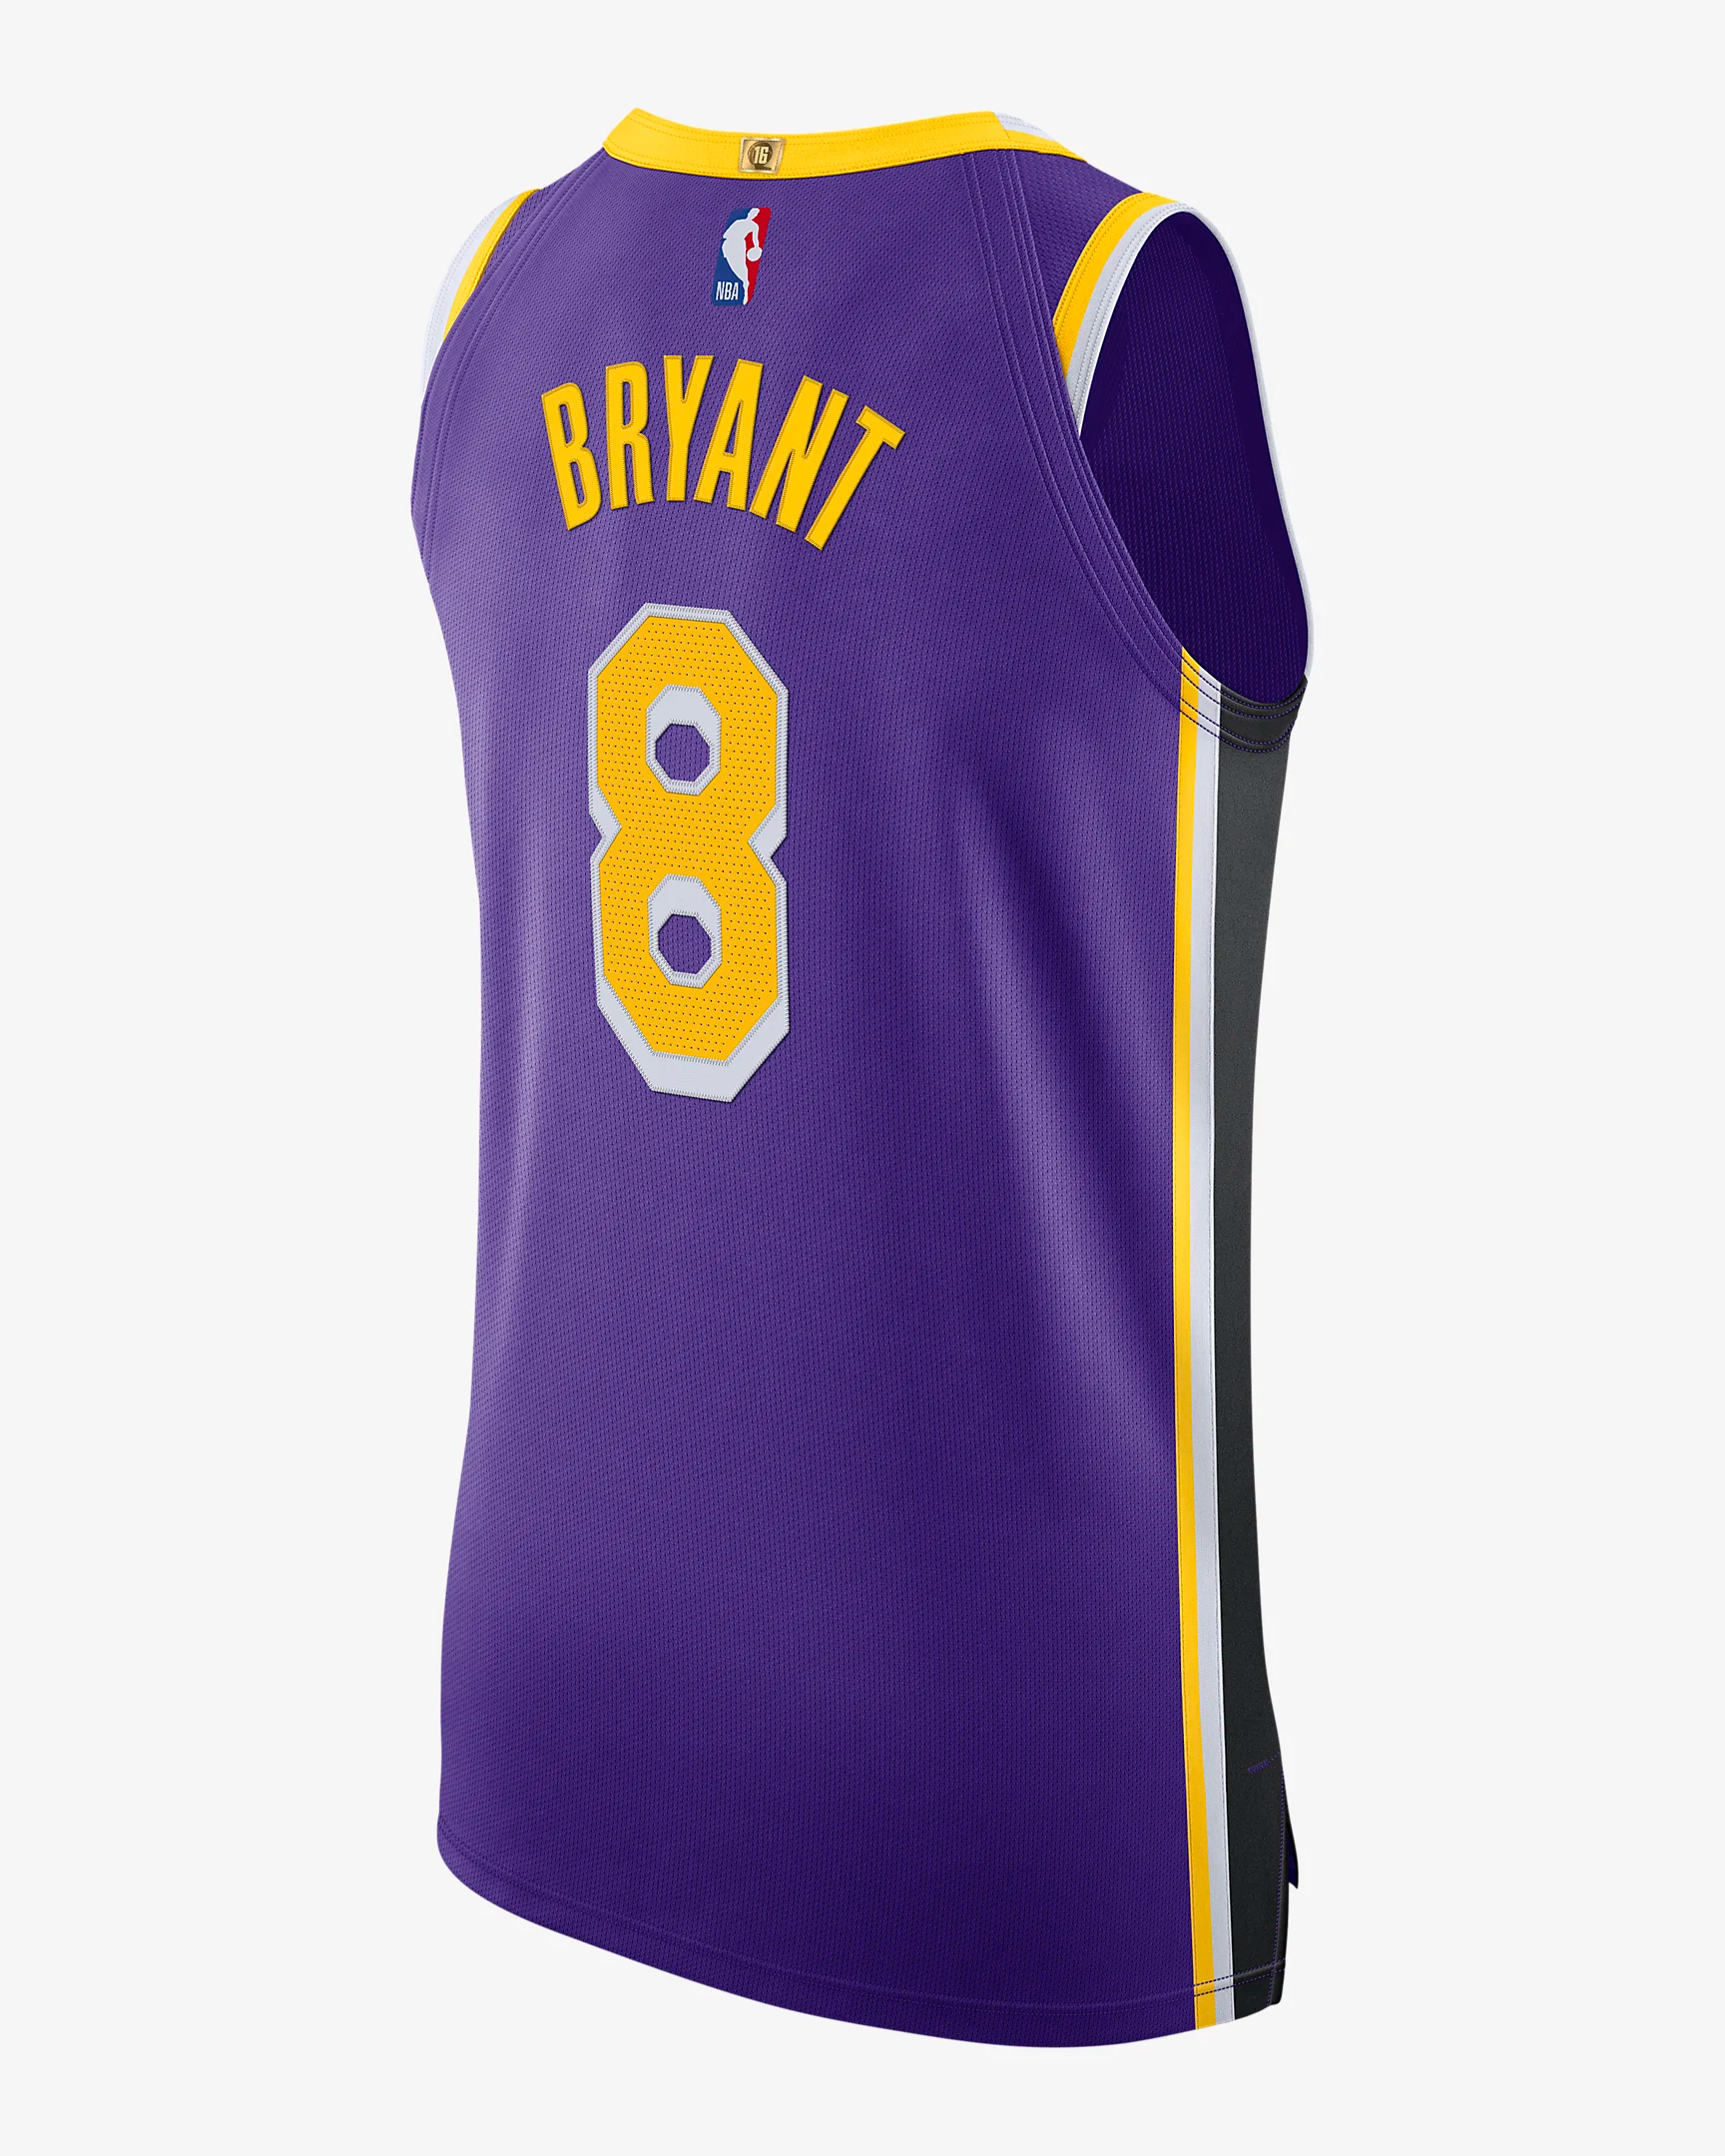 los-angeles-lakers-statement-edition-nba-authentic-jersey-P4mnp9 (1).png